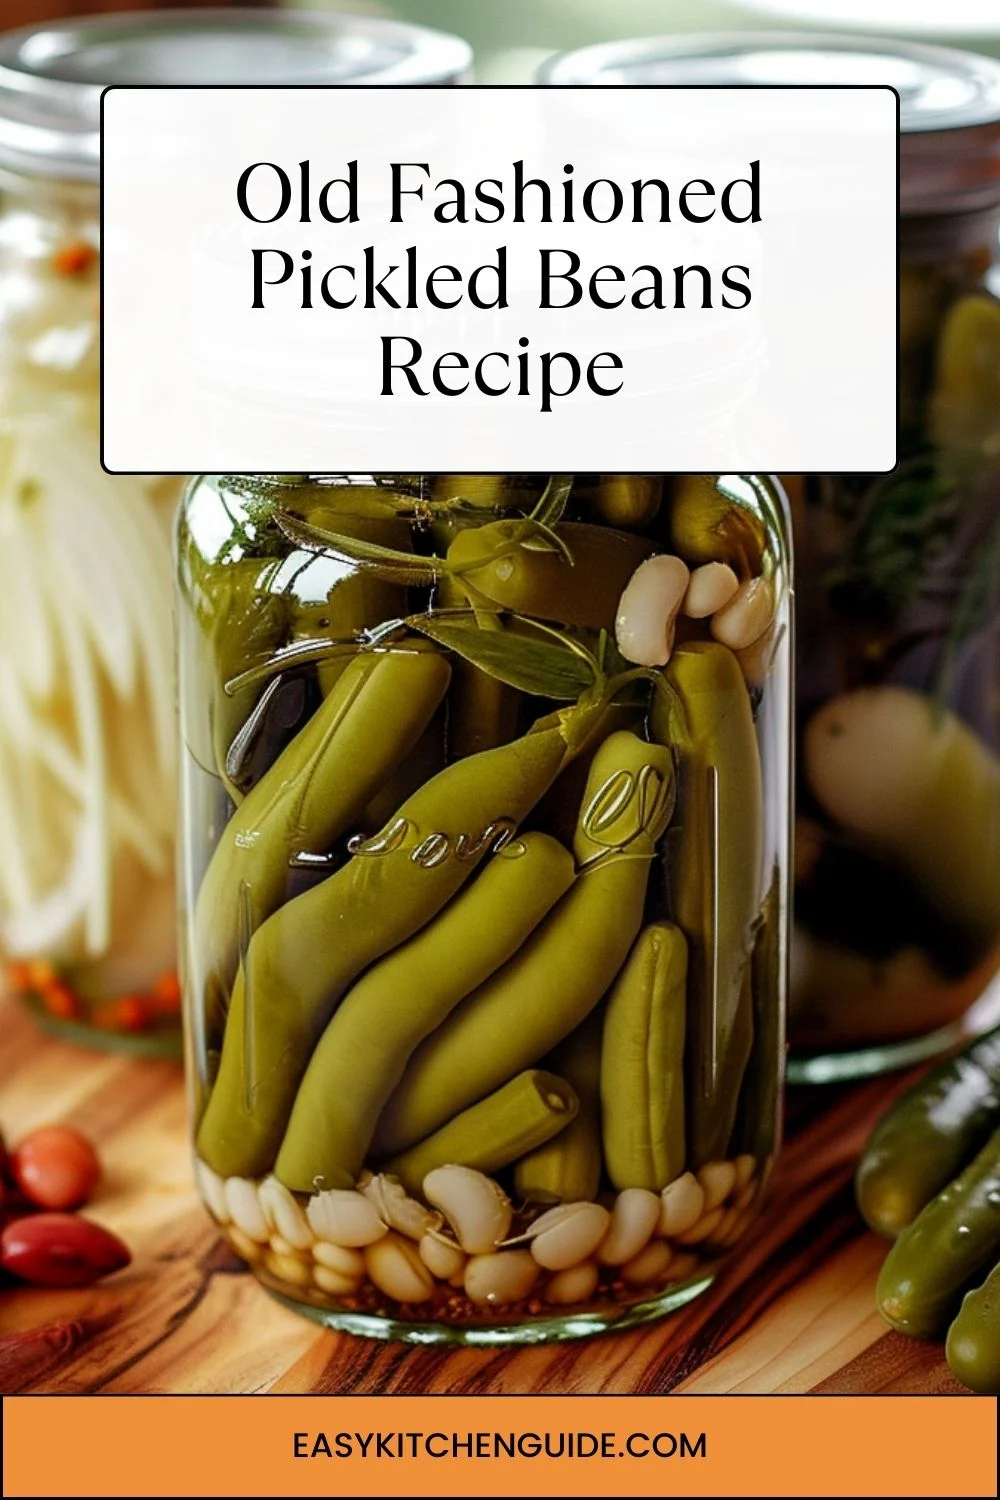 Old Fashioned Pickled Beans Recipe